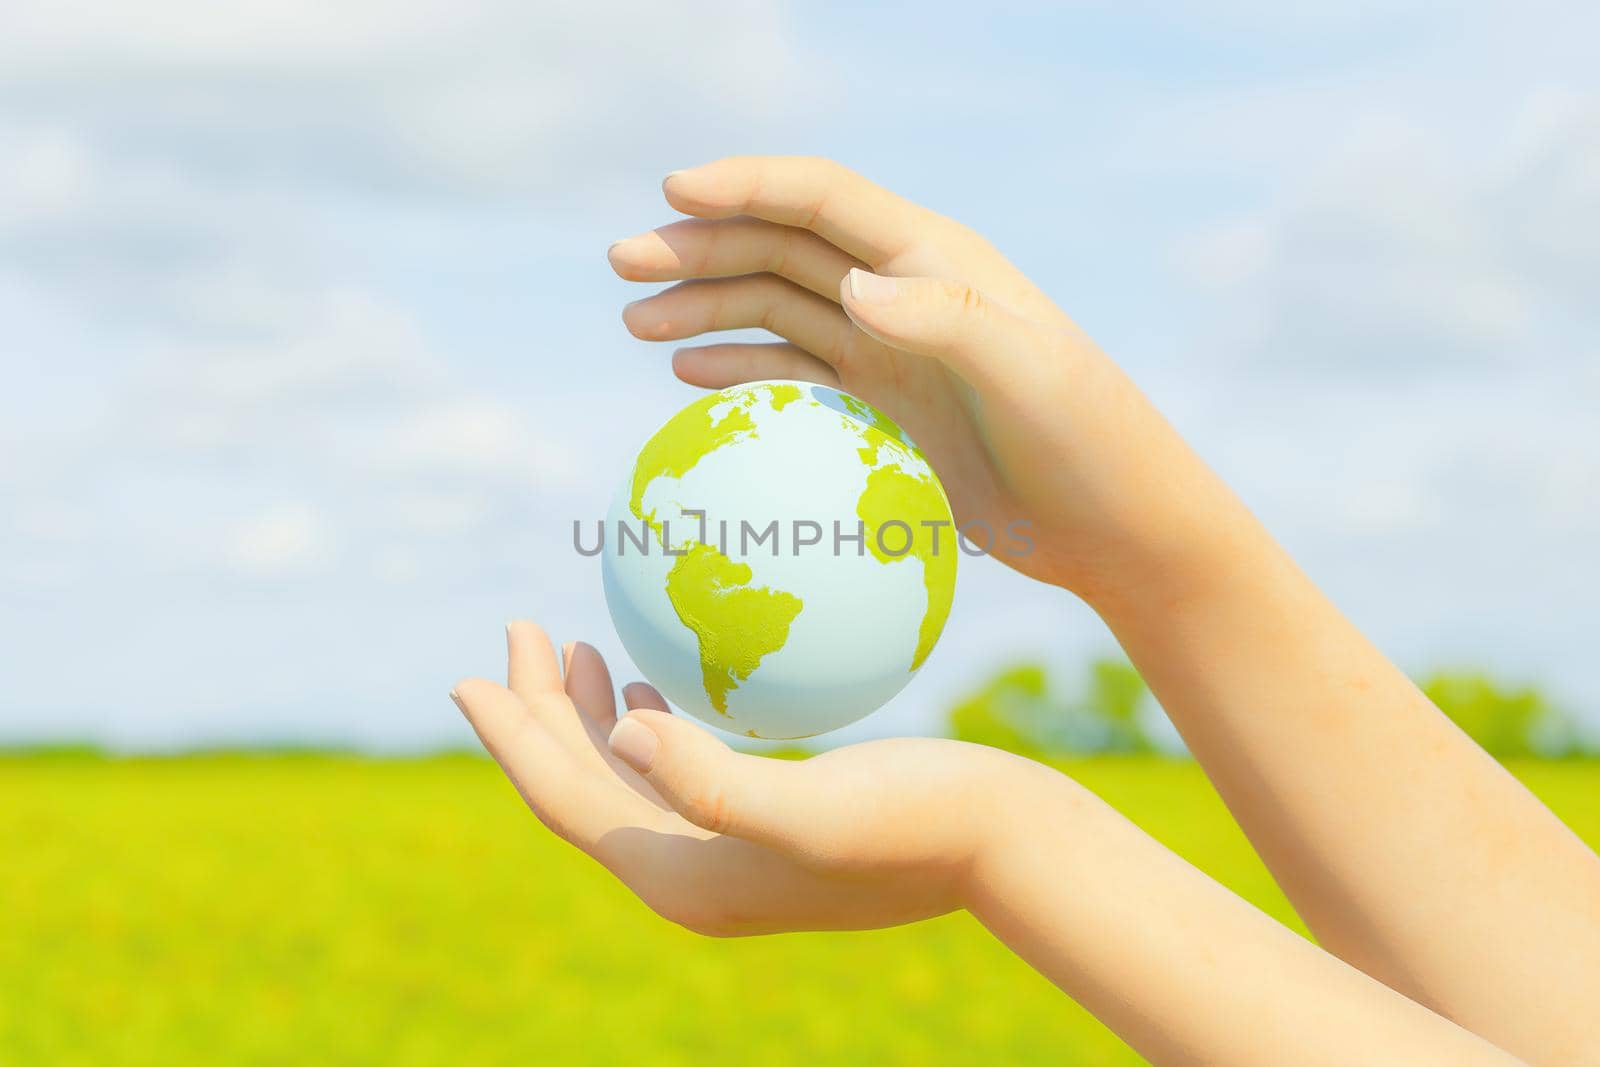 two female hands holding planet earth with blurred background of green field with sky. environment concept. 3d rendering